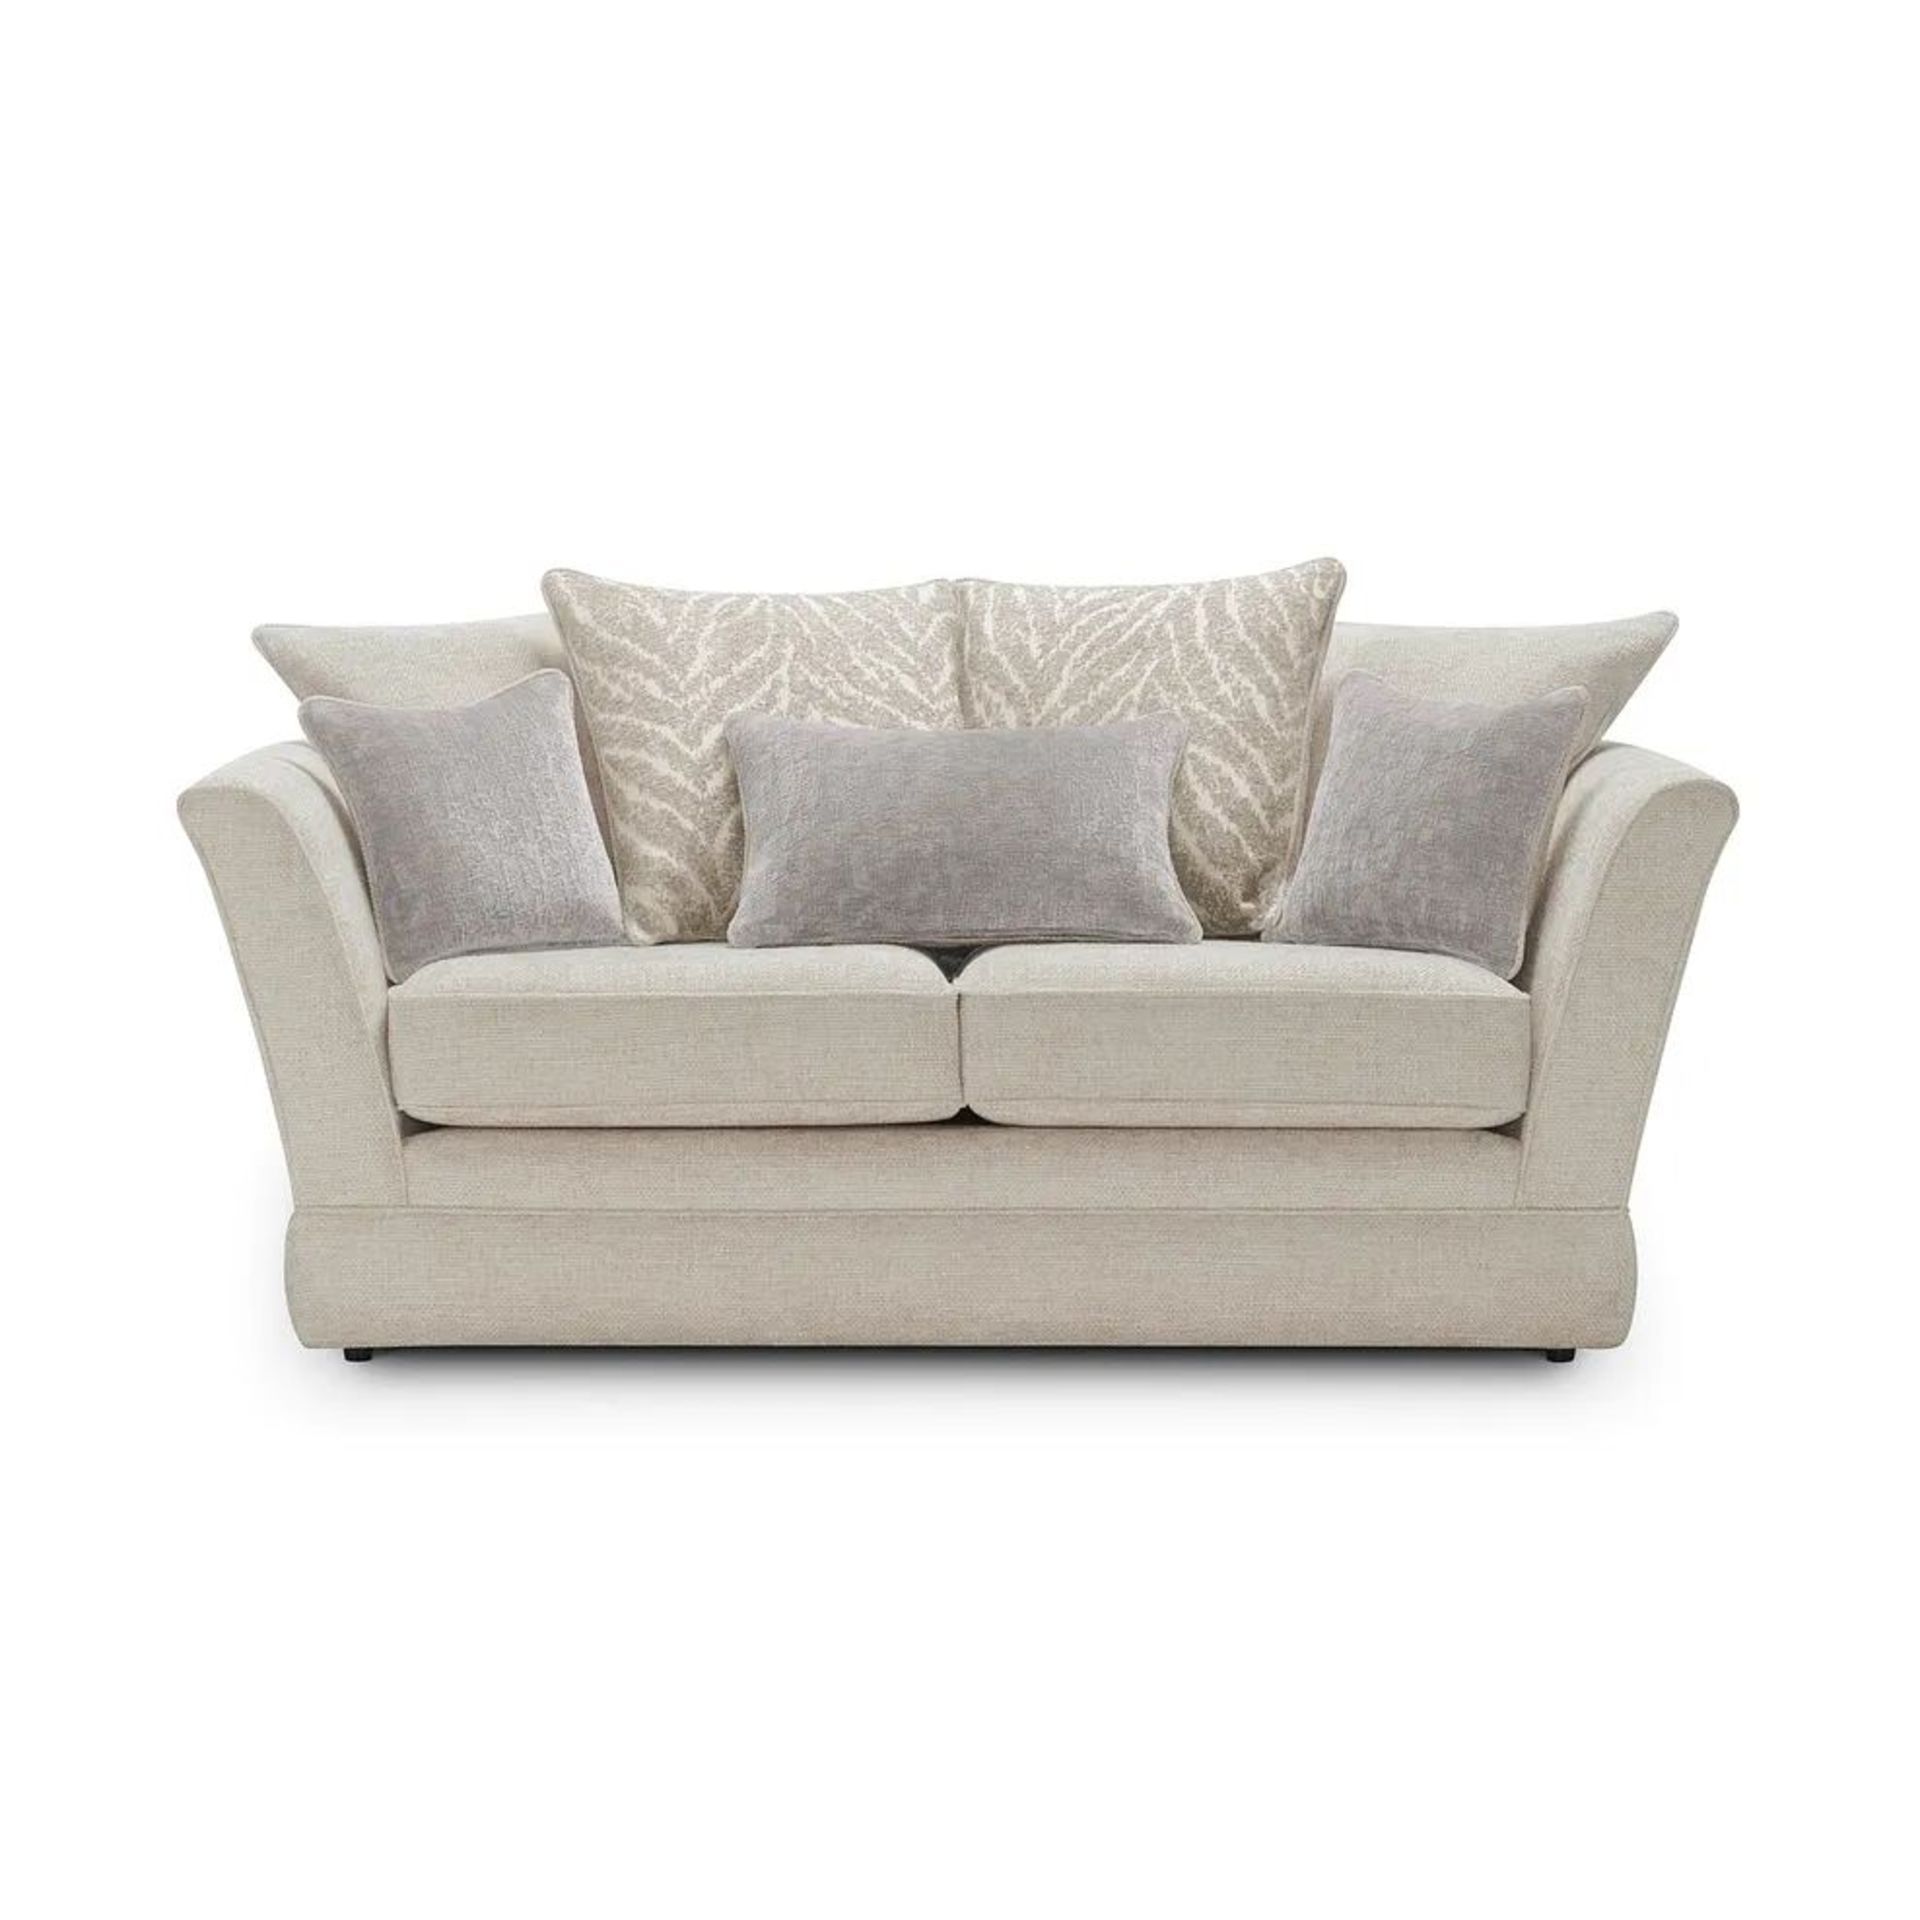 BRAND NEW CARRINGTON 2 Seater Pillow Back Sofa - NATURAL FABRIC. RRP £999. Make our 3-seater - Image 2 of 8